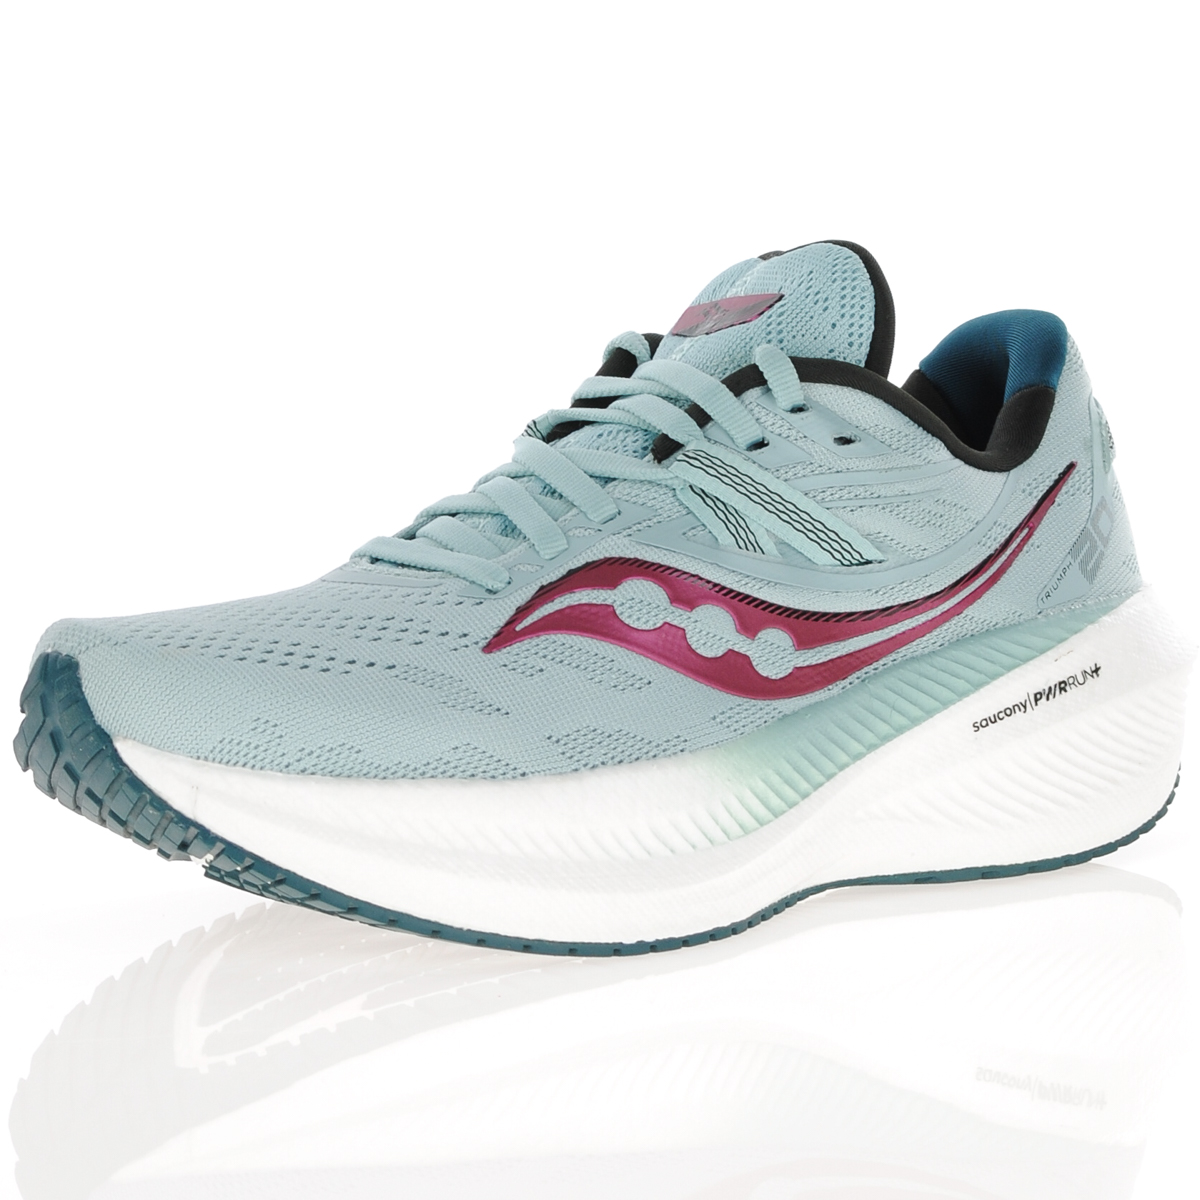 Saucony - Triumph 20 Running Shoes Mineral - S10759, The Shoe Horn